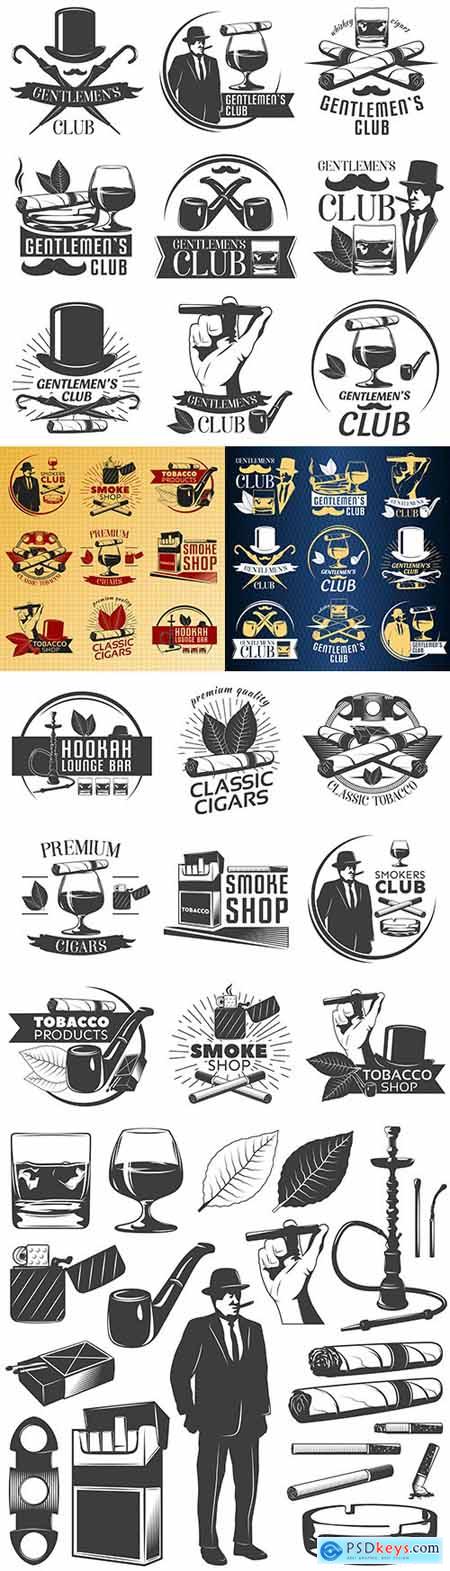 Vintage antique emblems and logos with text design 9